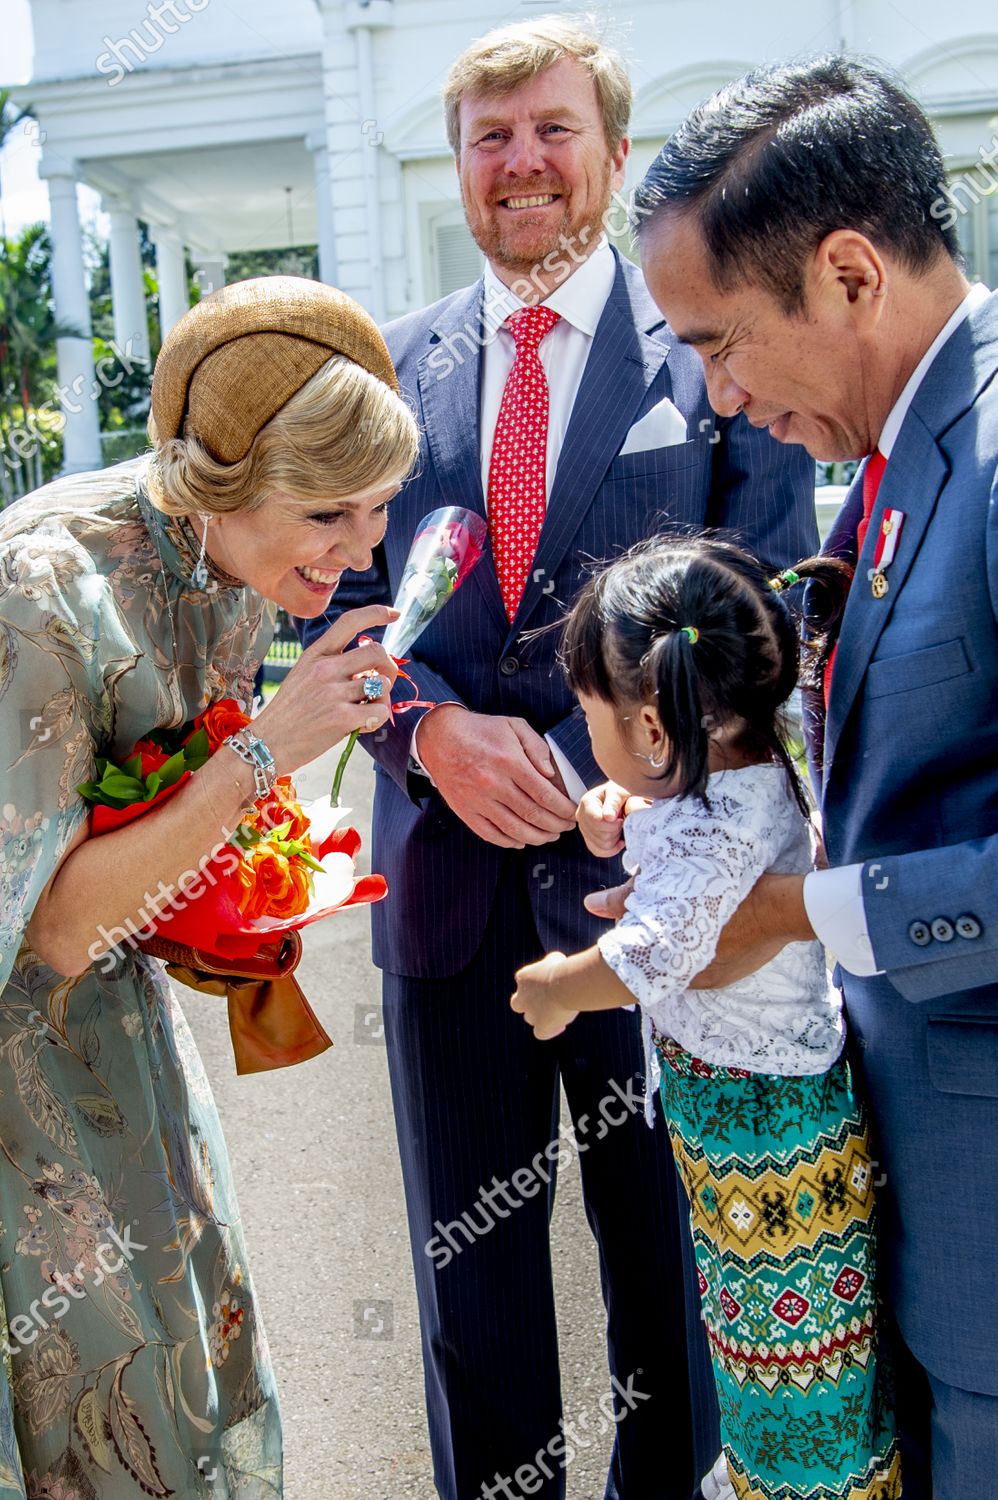 dutch-royals-visit-to-indonesia-shutterstock-editorial-10578533at.jpg